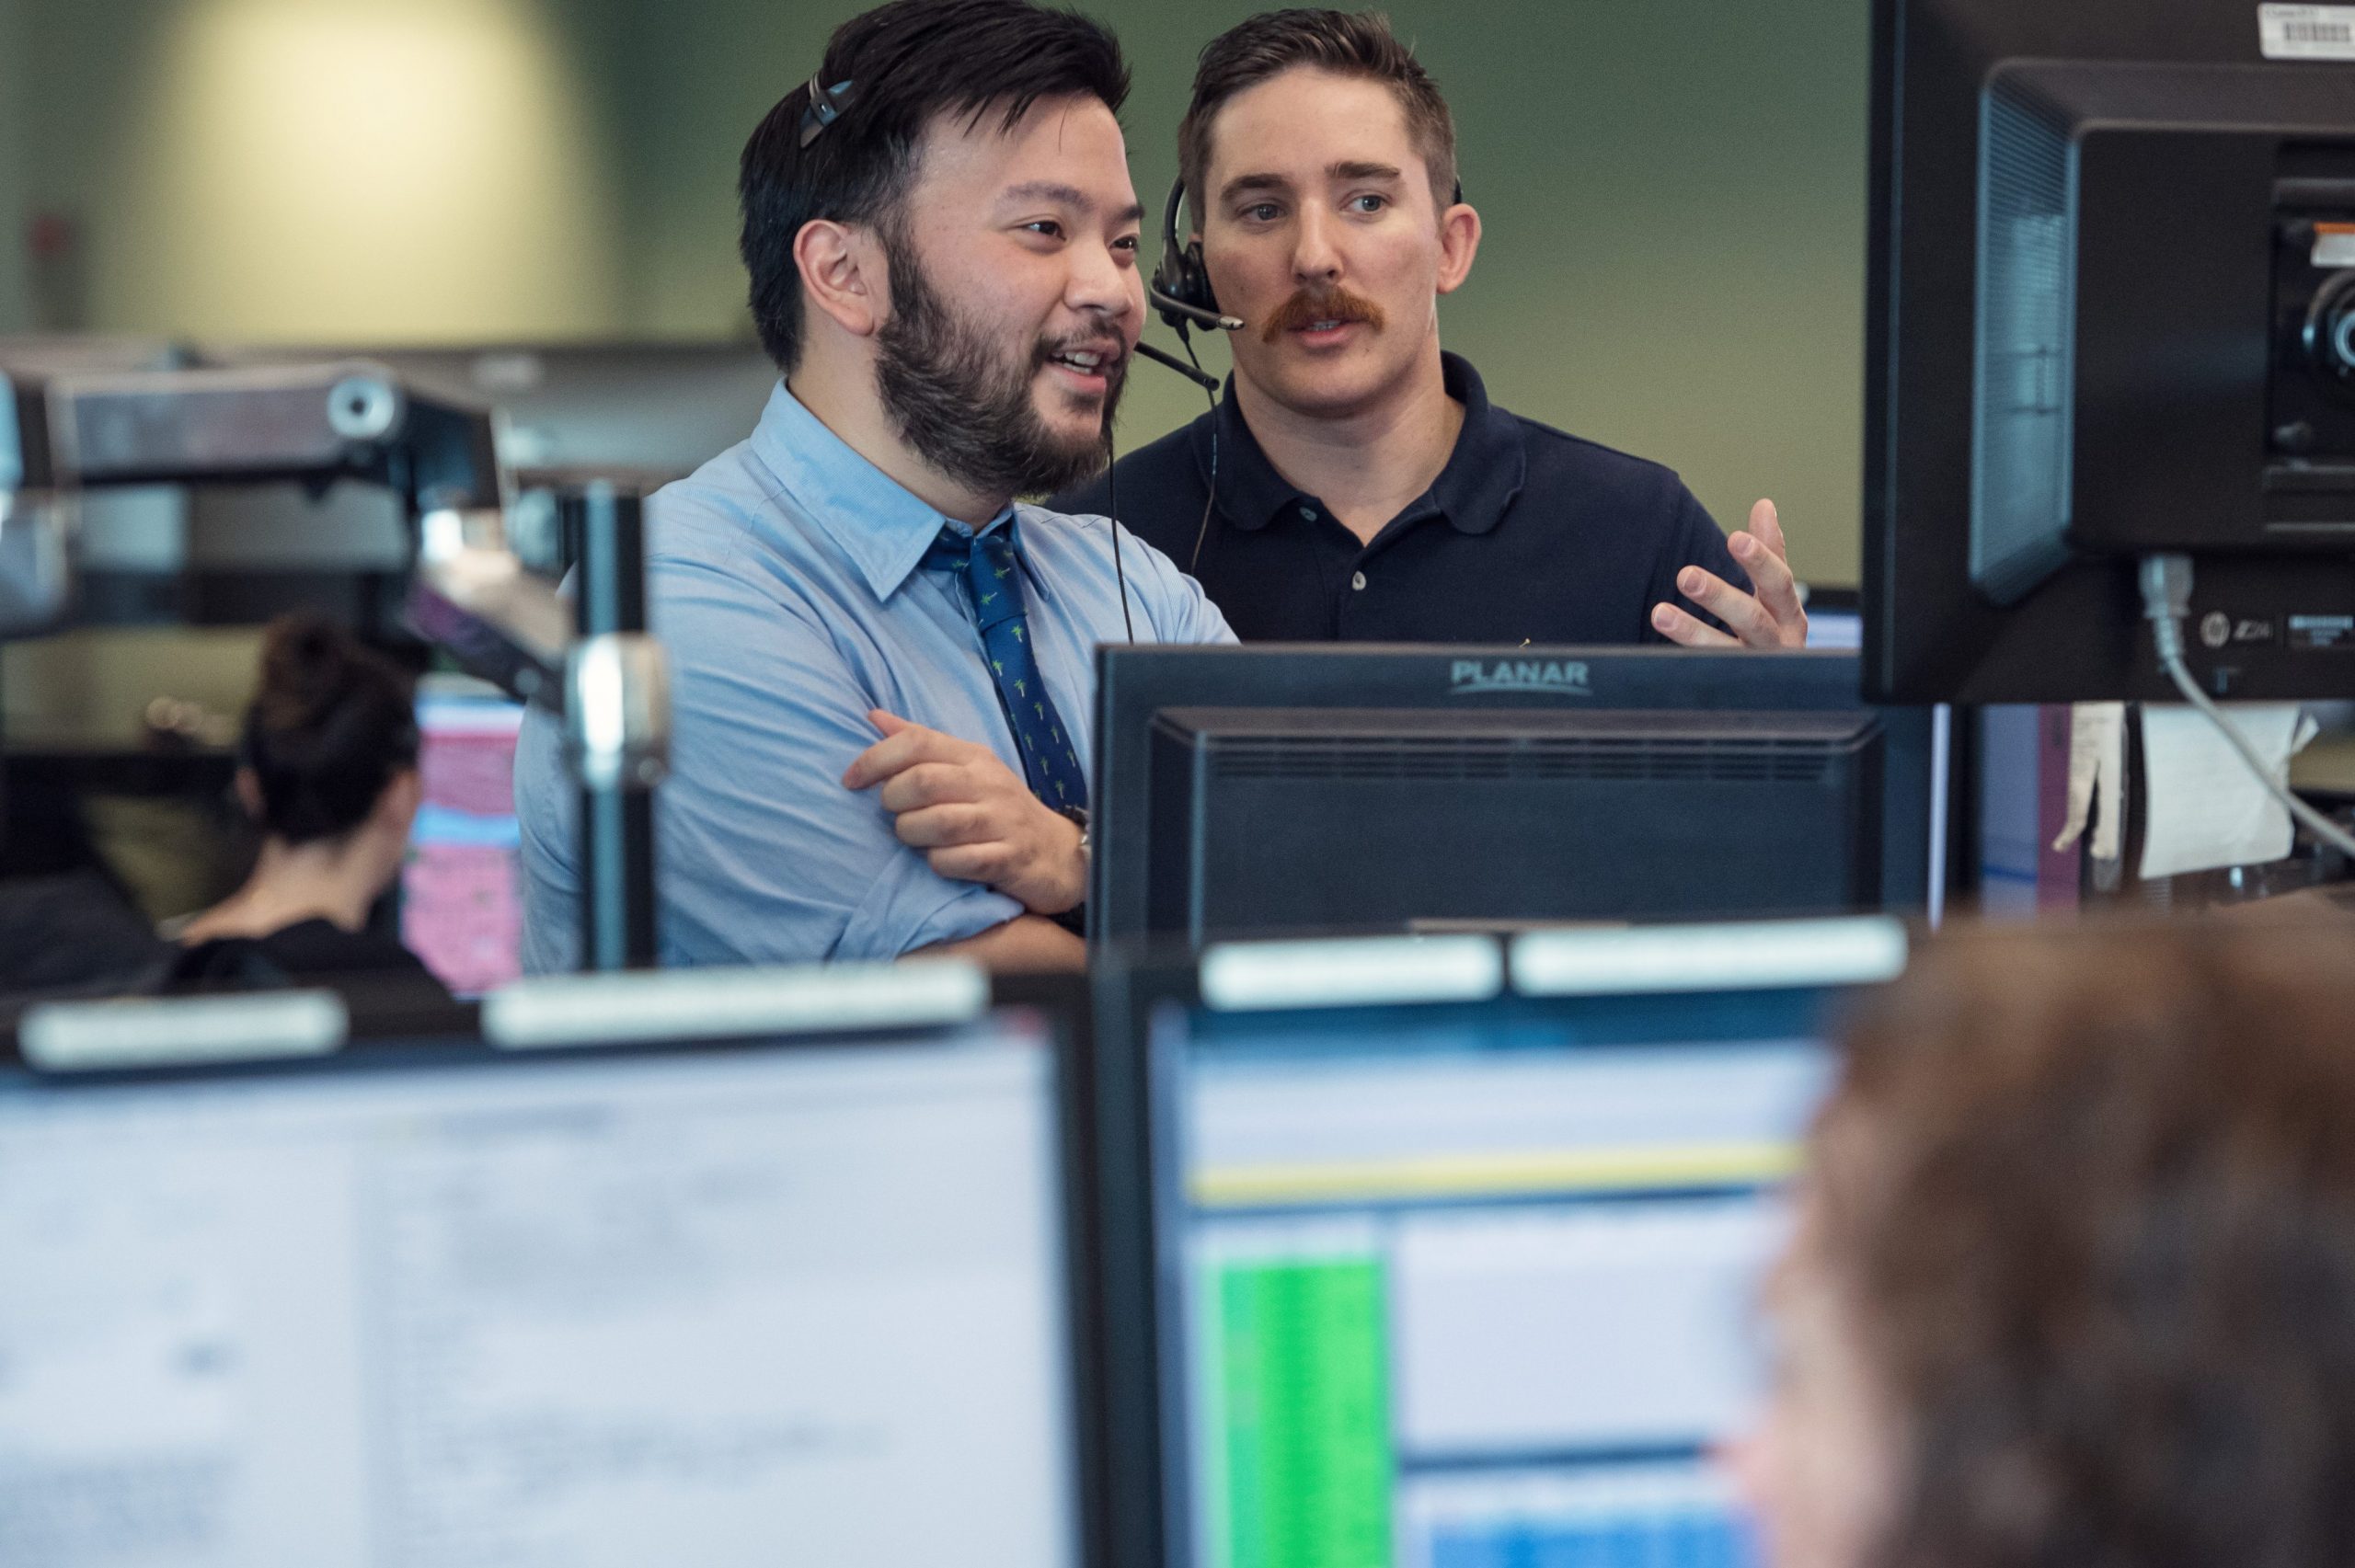 Two men at a call center looking at a monitor